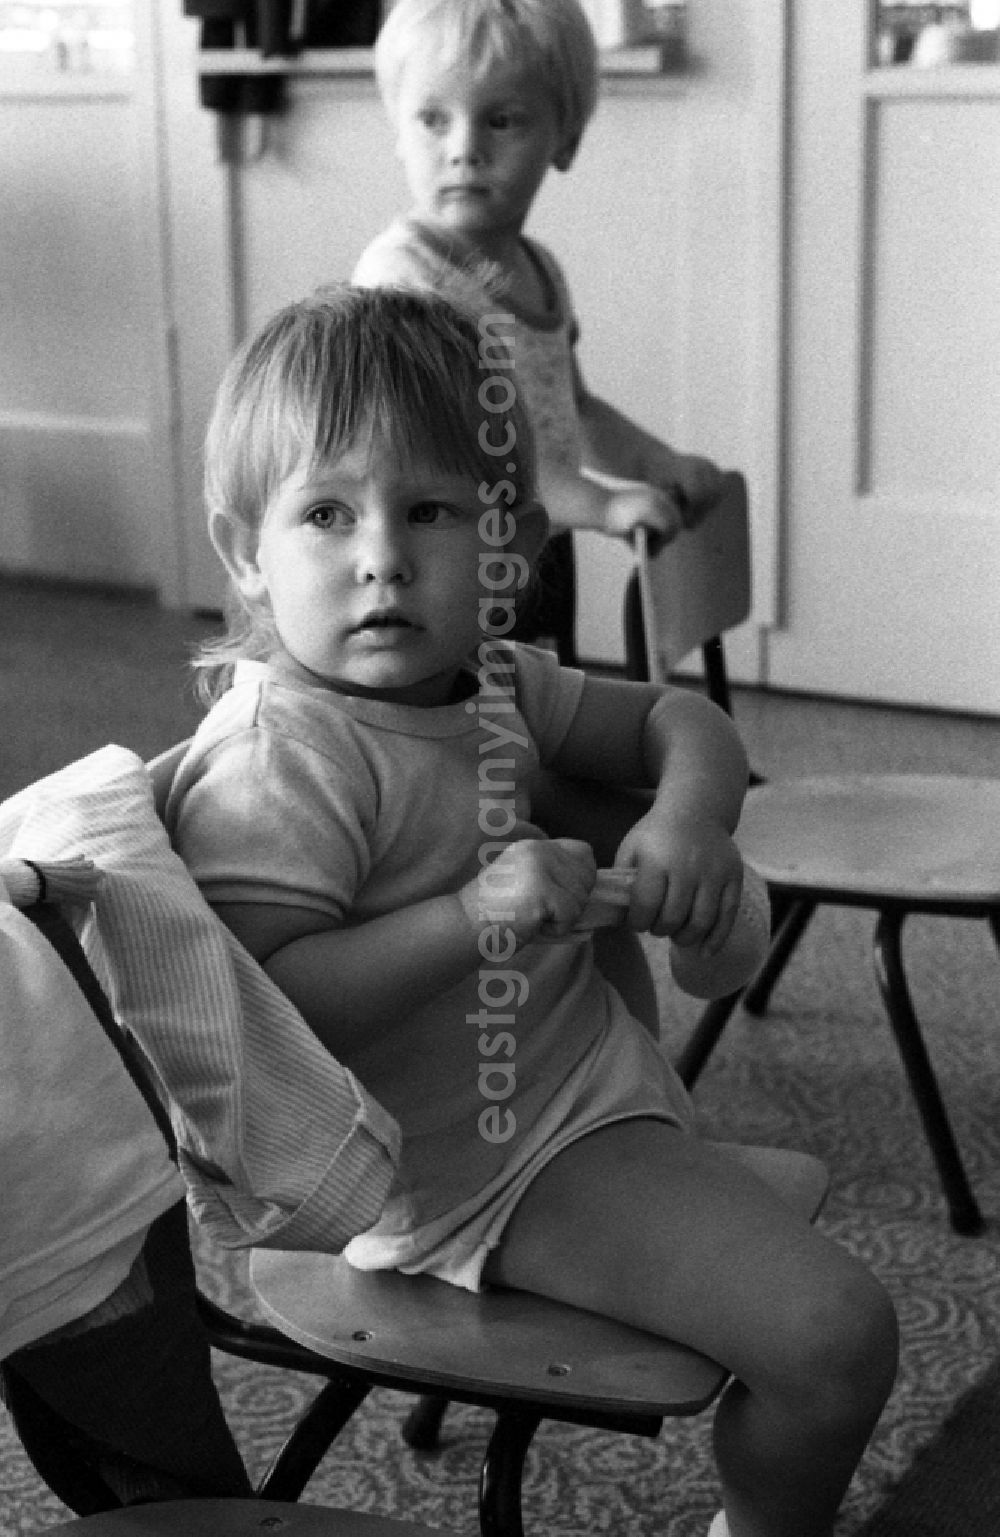 GDR image archive: Berlin - Preparing for a nap in the kindergarten in Berlin Eastberlin on the territory of the former GDR, German Democratic Republic. Toddler tries to undress on his own and pulls on his sock or stocking